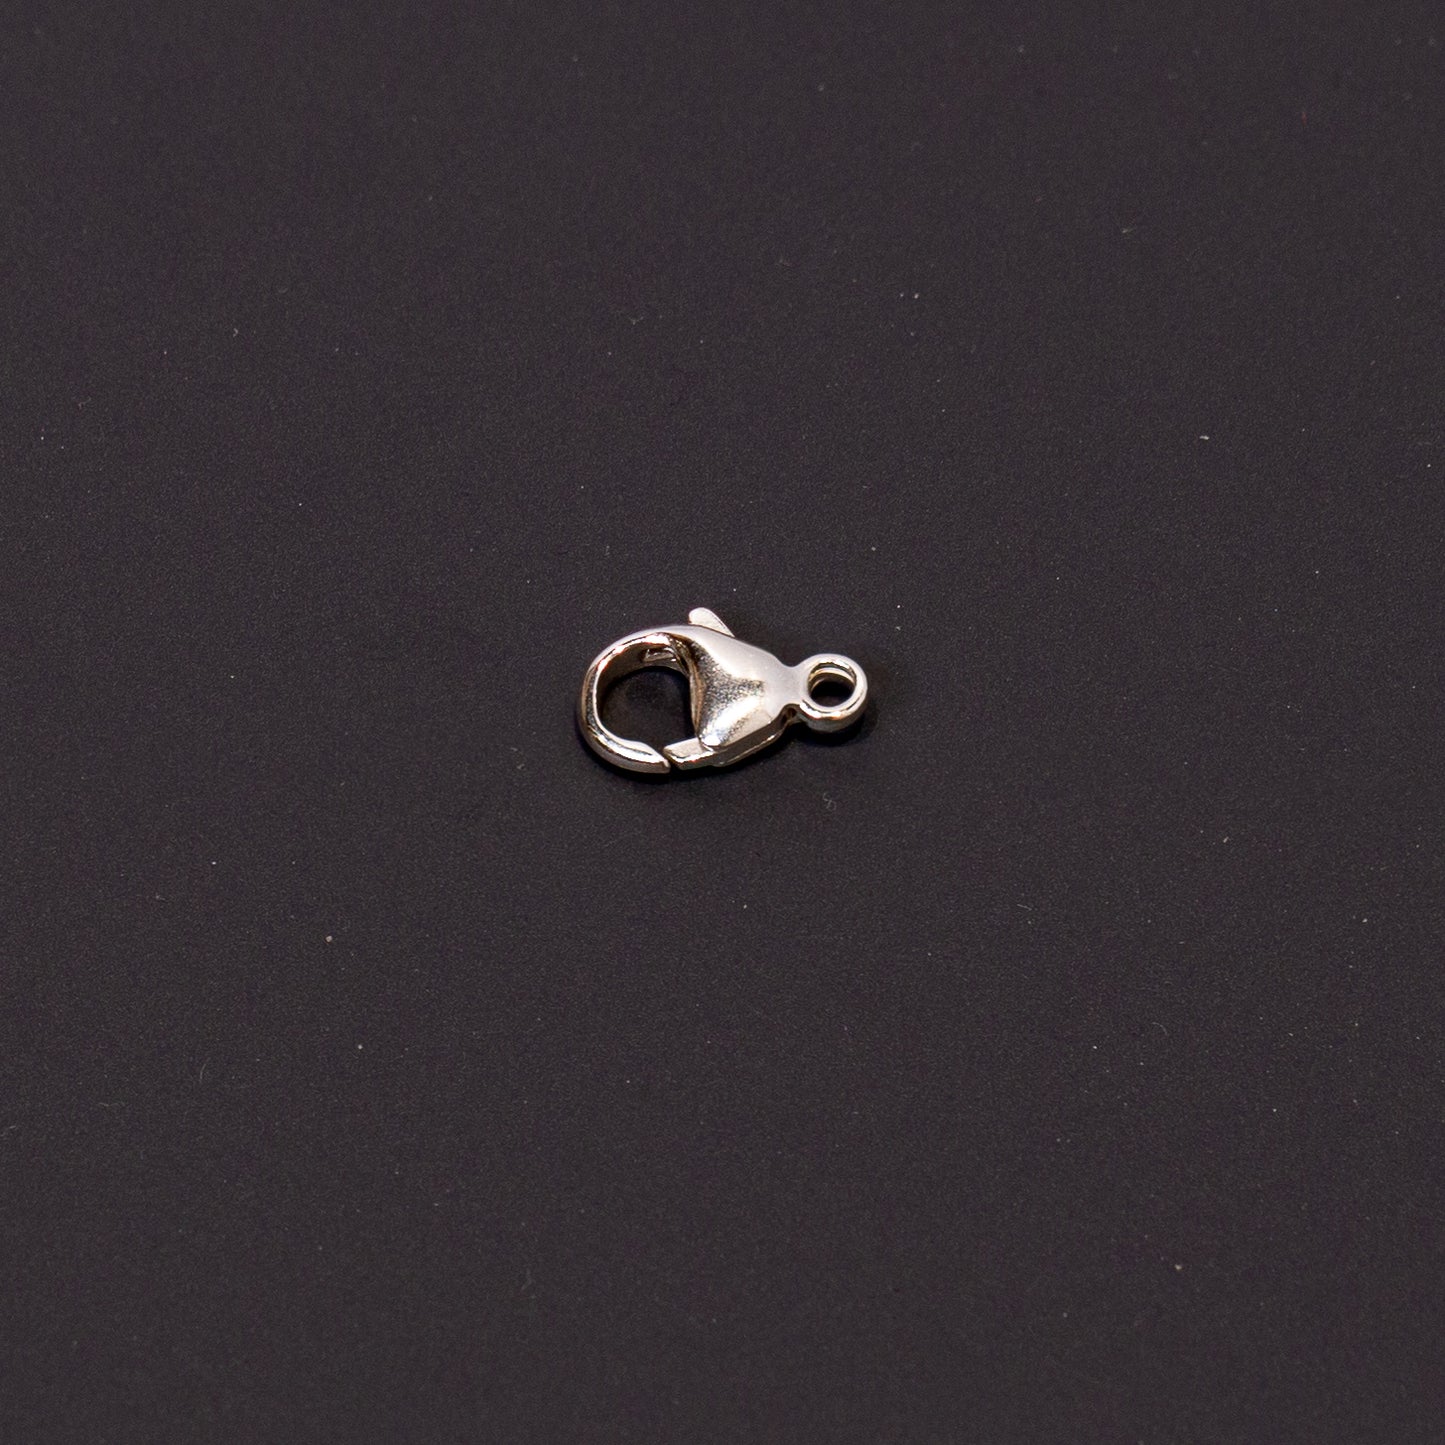 Clasp: 11mm Oval Lobster (3 Metal Options Available)